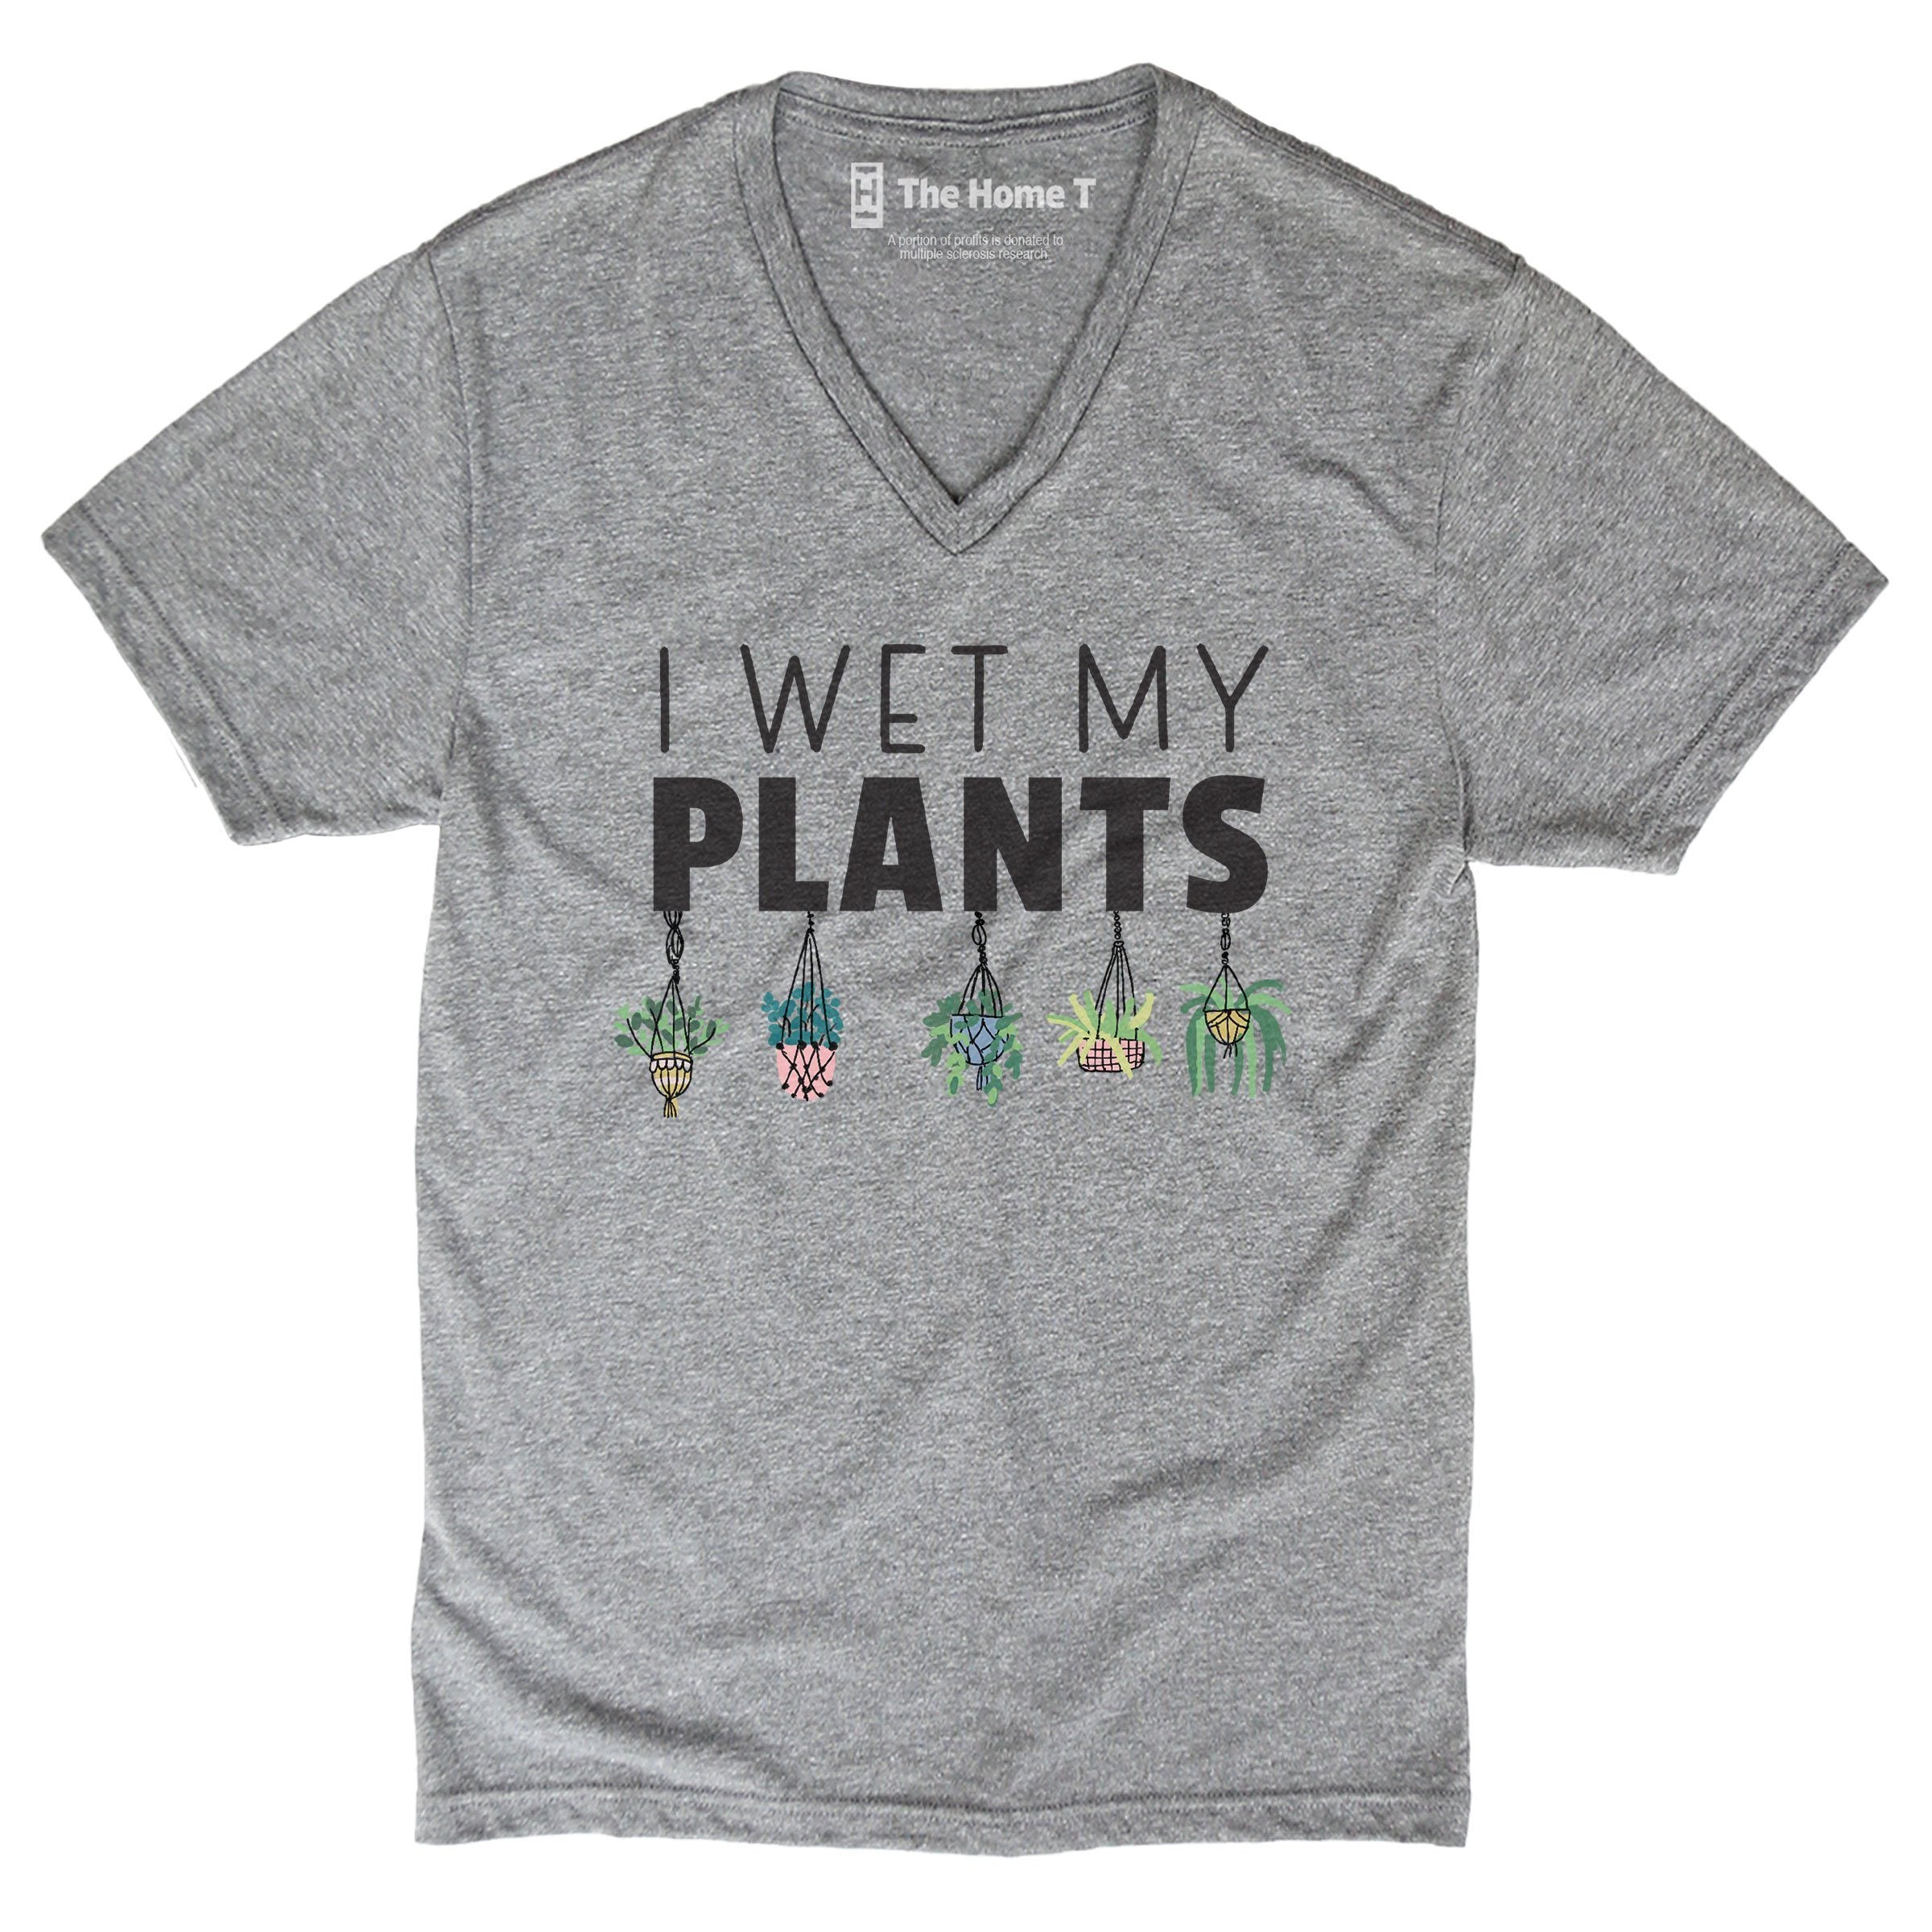 Wet My Plants The Home T XS V-Neck